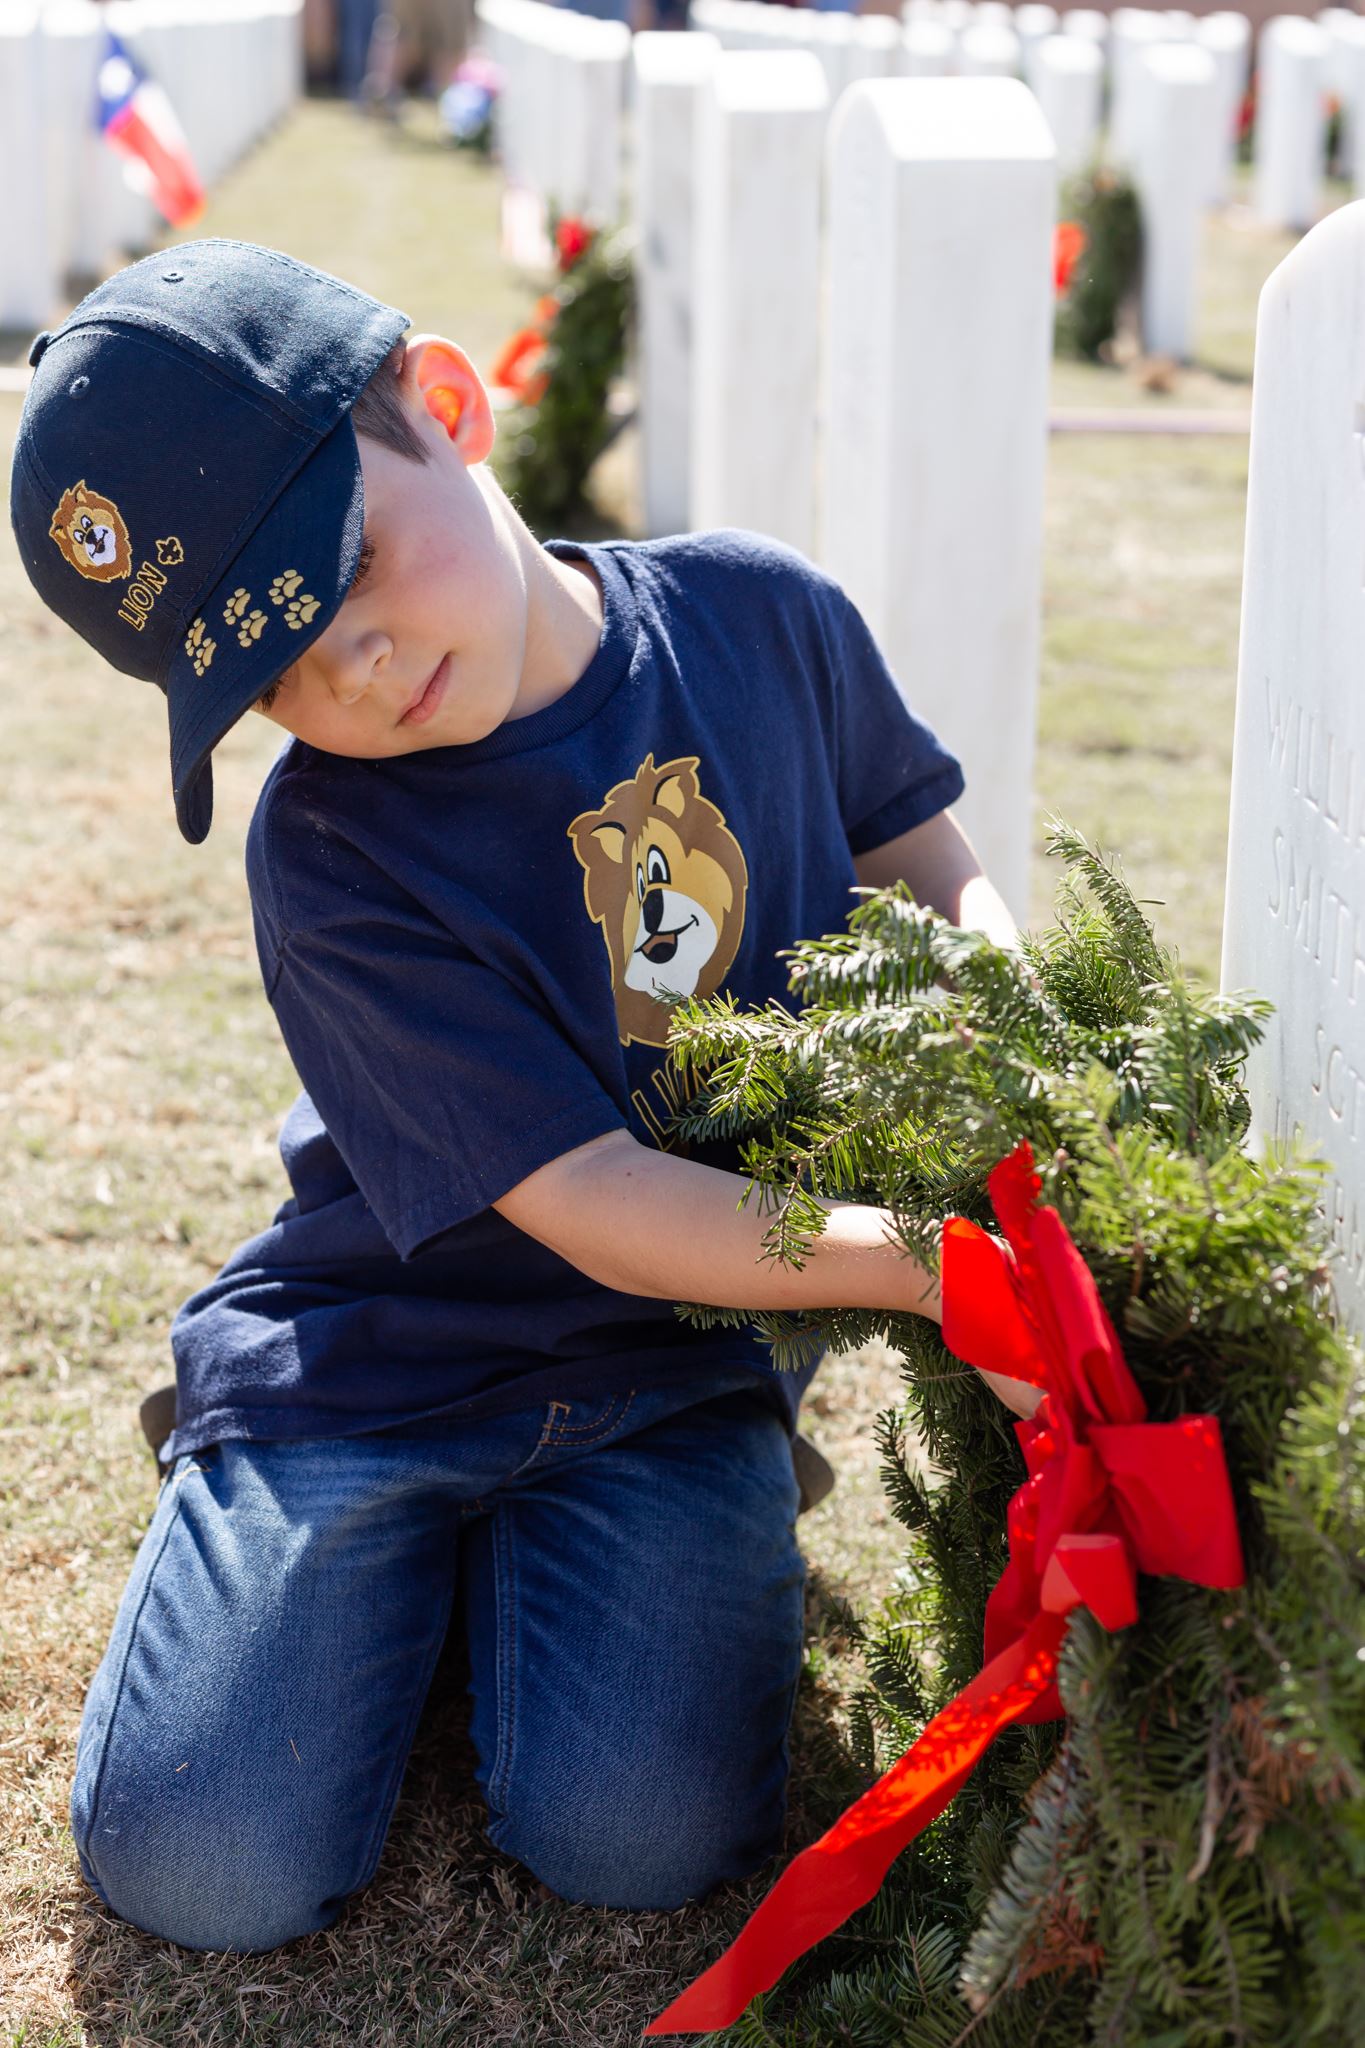 Our Lion Cub Scout helping lay wreaths in 2019.